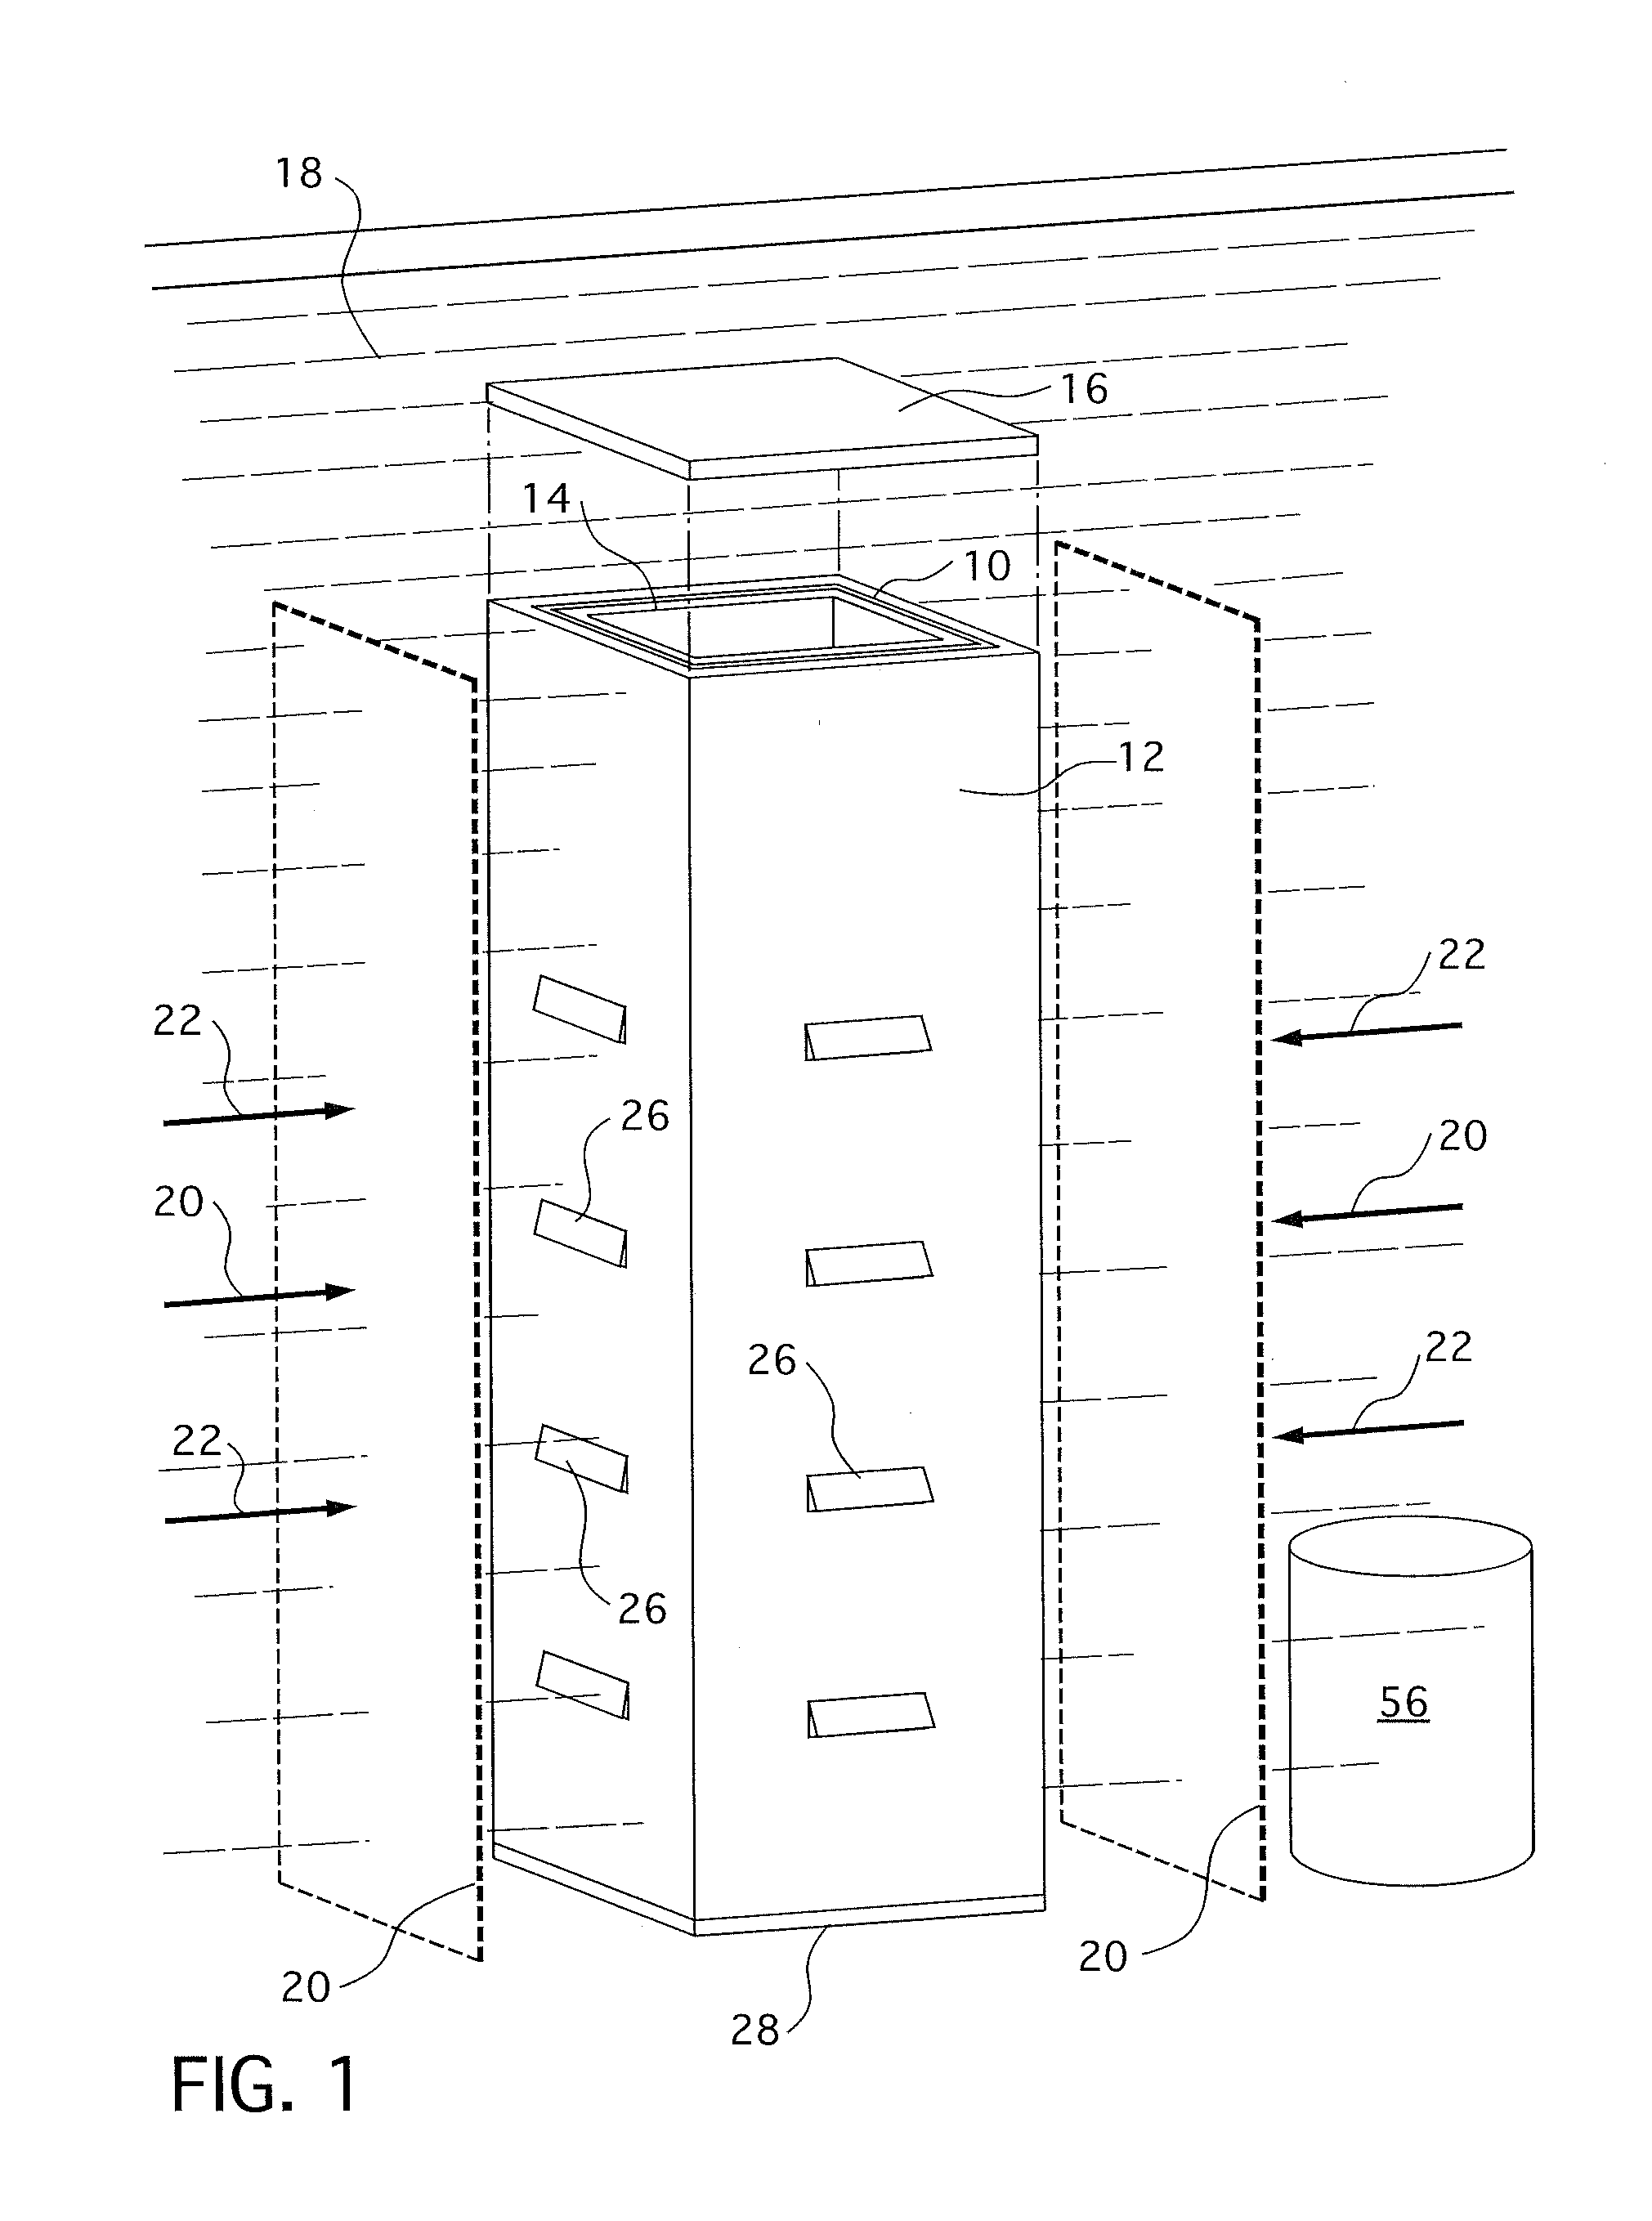 Method of segmenting and packaging irradiated components